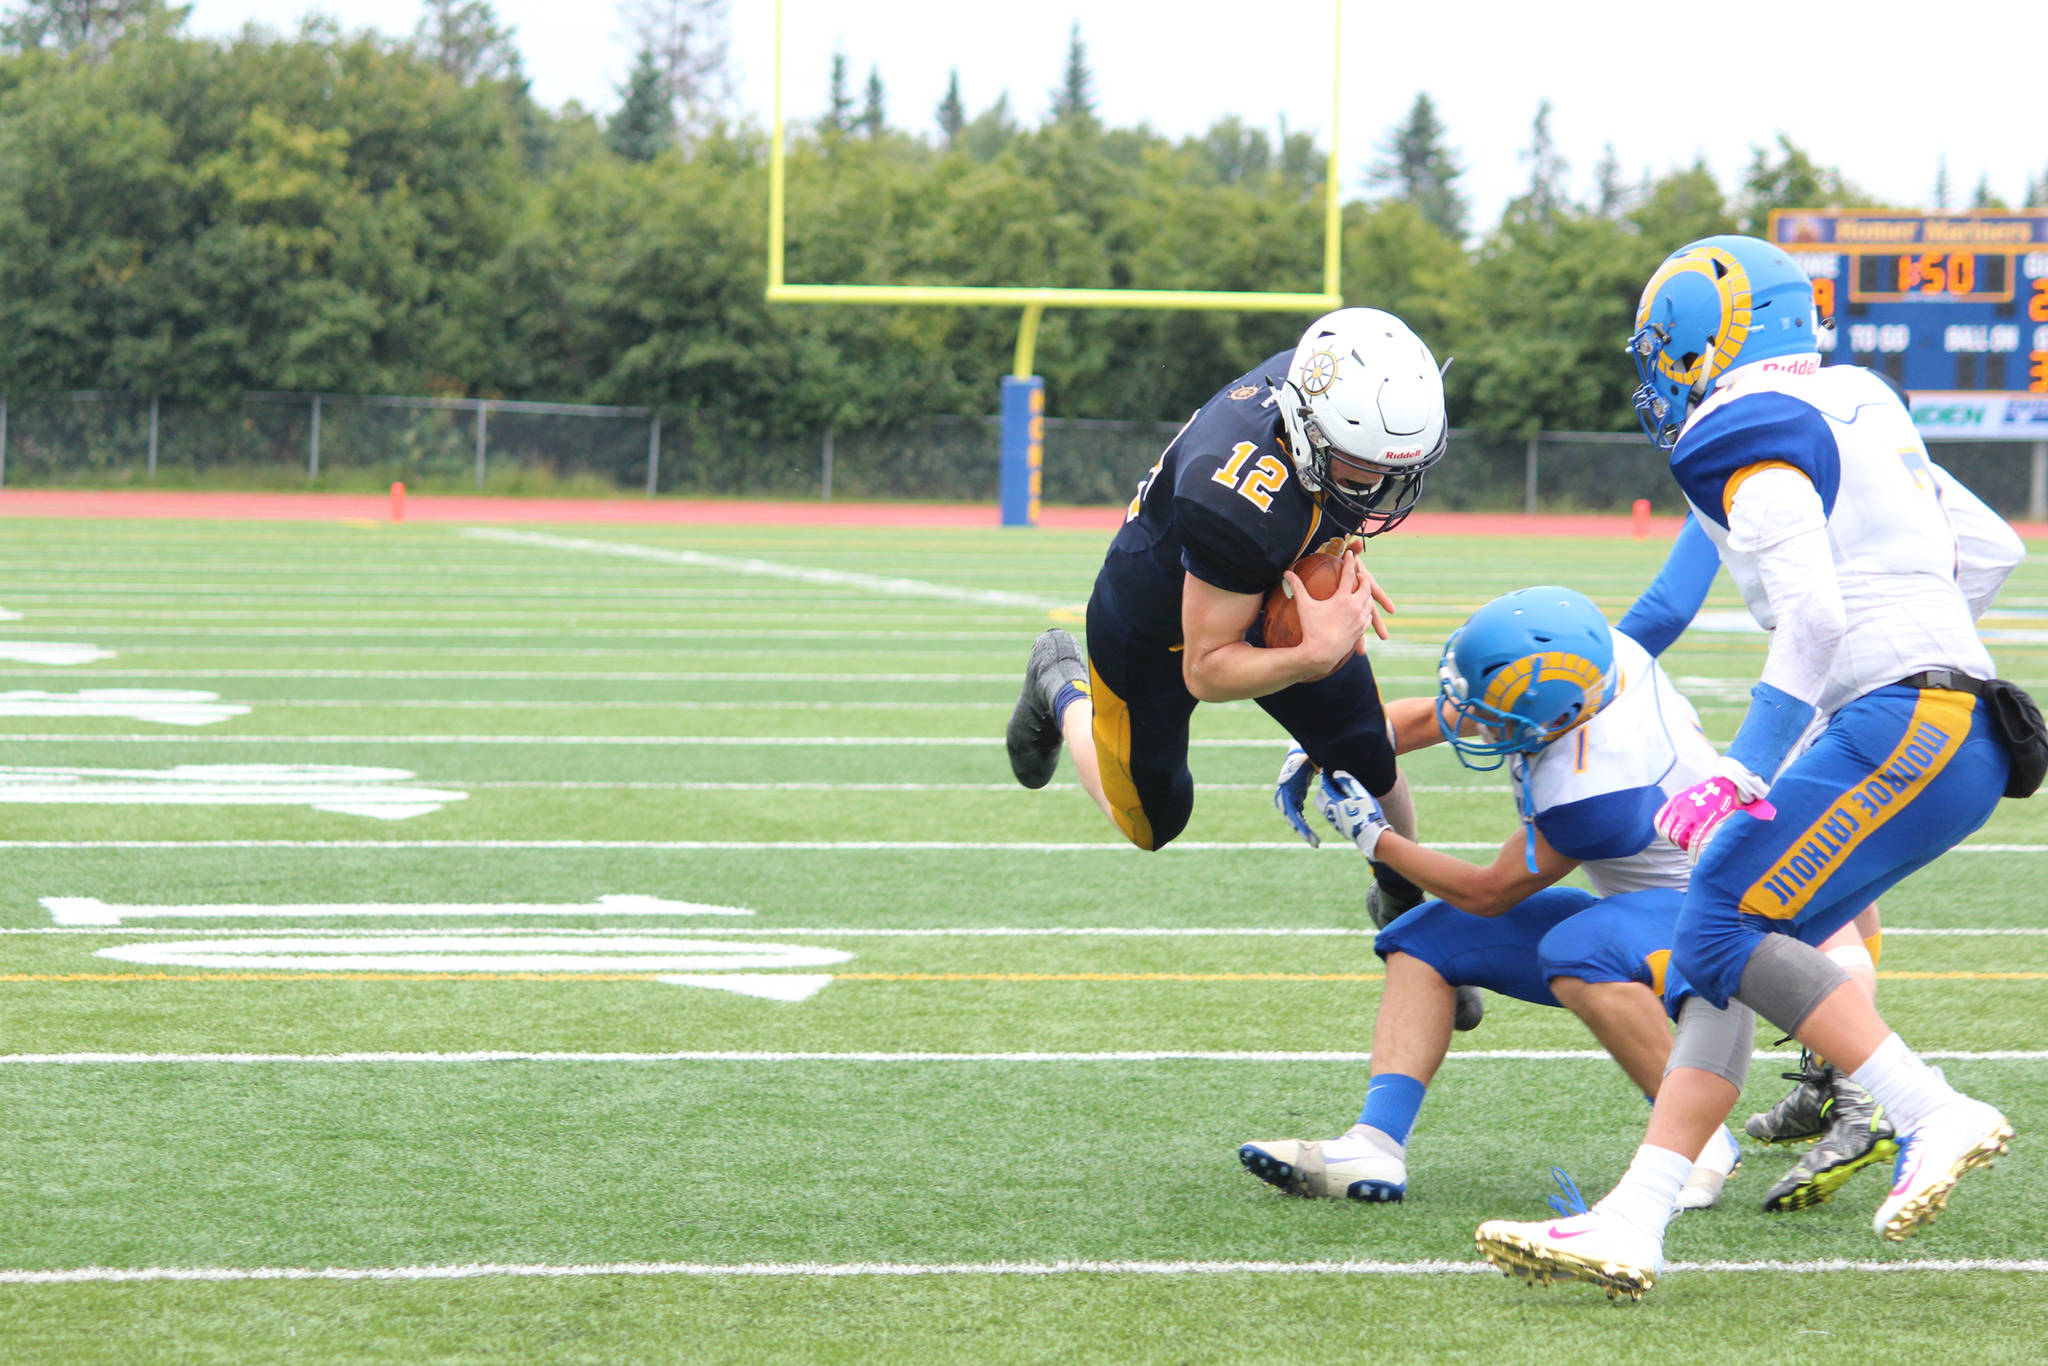 Quarterback Anthony Kalugin runs the ball while being tackled by Monroe Catholic High School’s Jordan Higbee during their game Saturday, Aug. 25, 2018 at Homer High School in Homer, Alaska. The Rams beat the Mariners in a close game 28-27. (Photo by Megan Pacer/Homer News)